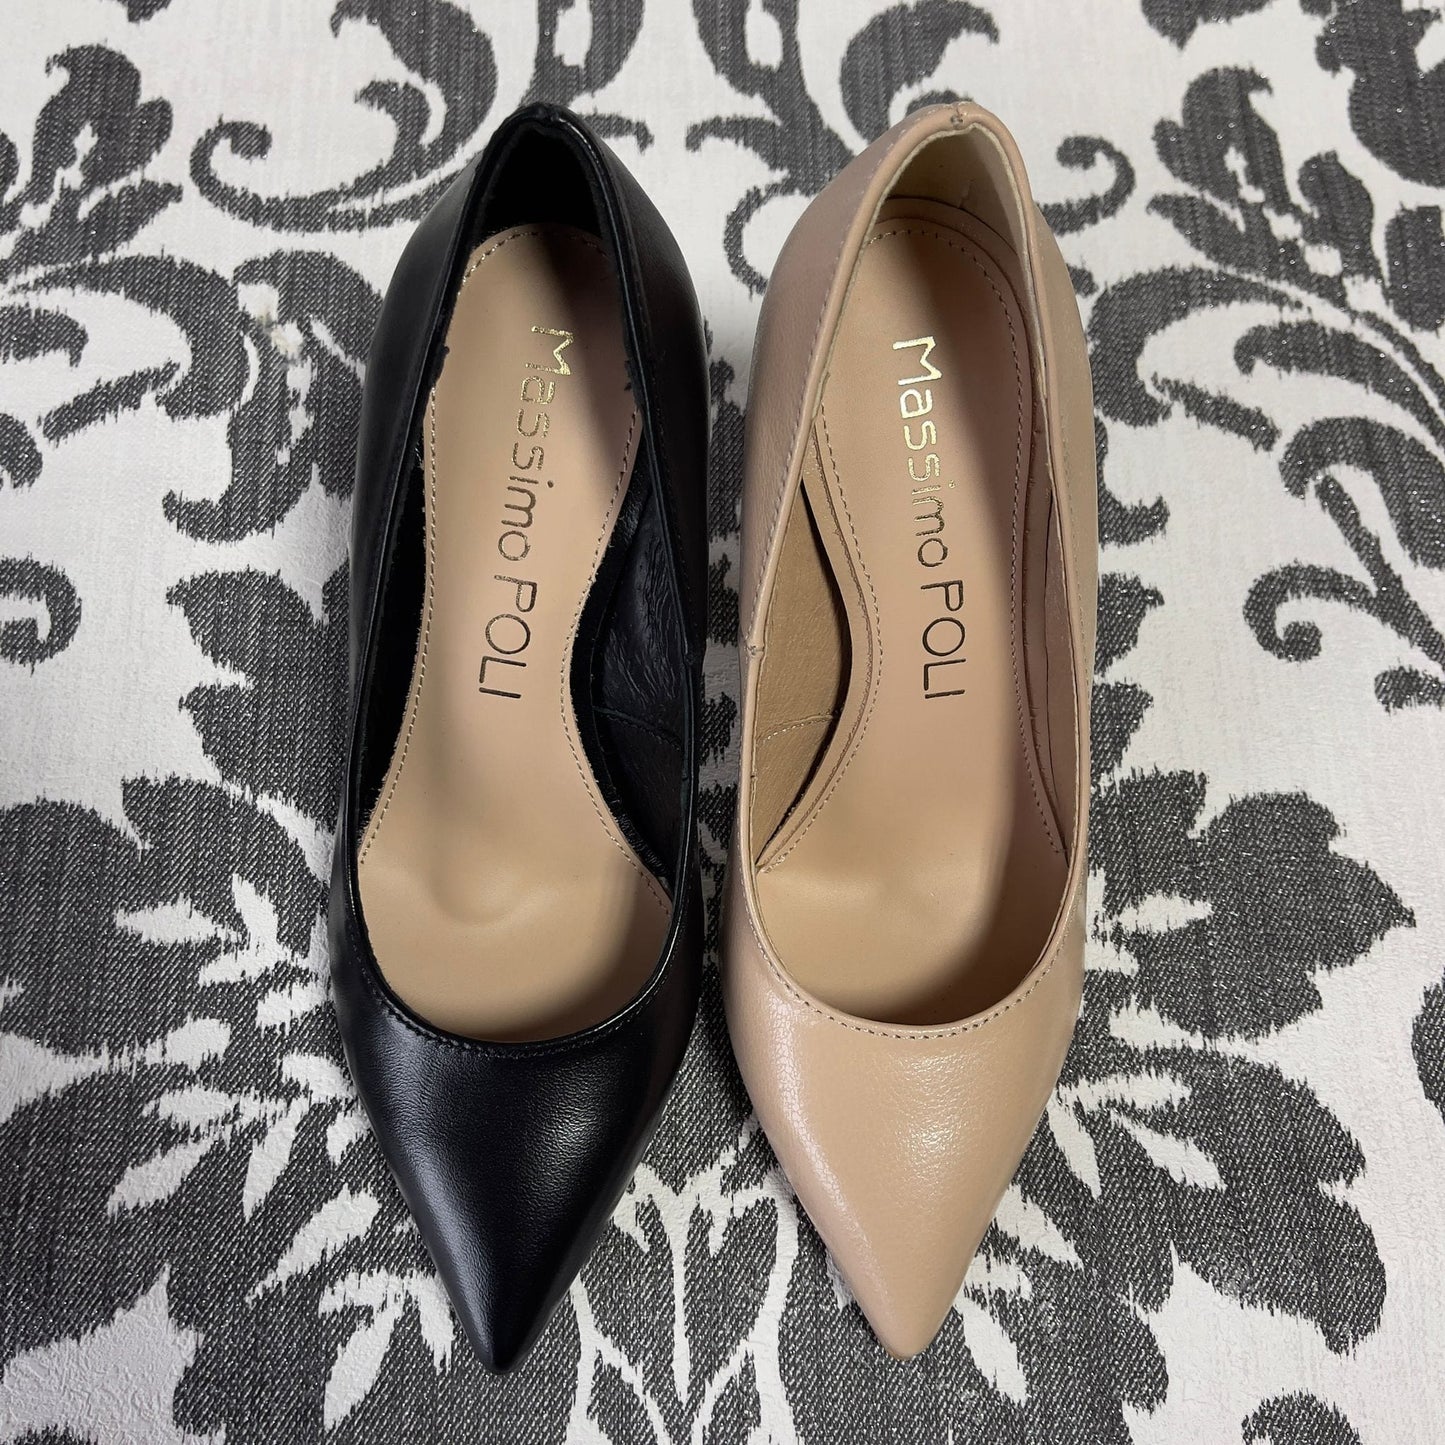 A collection of black and nude leather court heels in small size